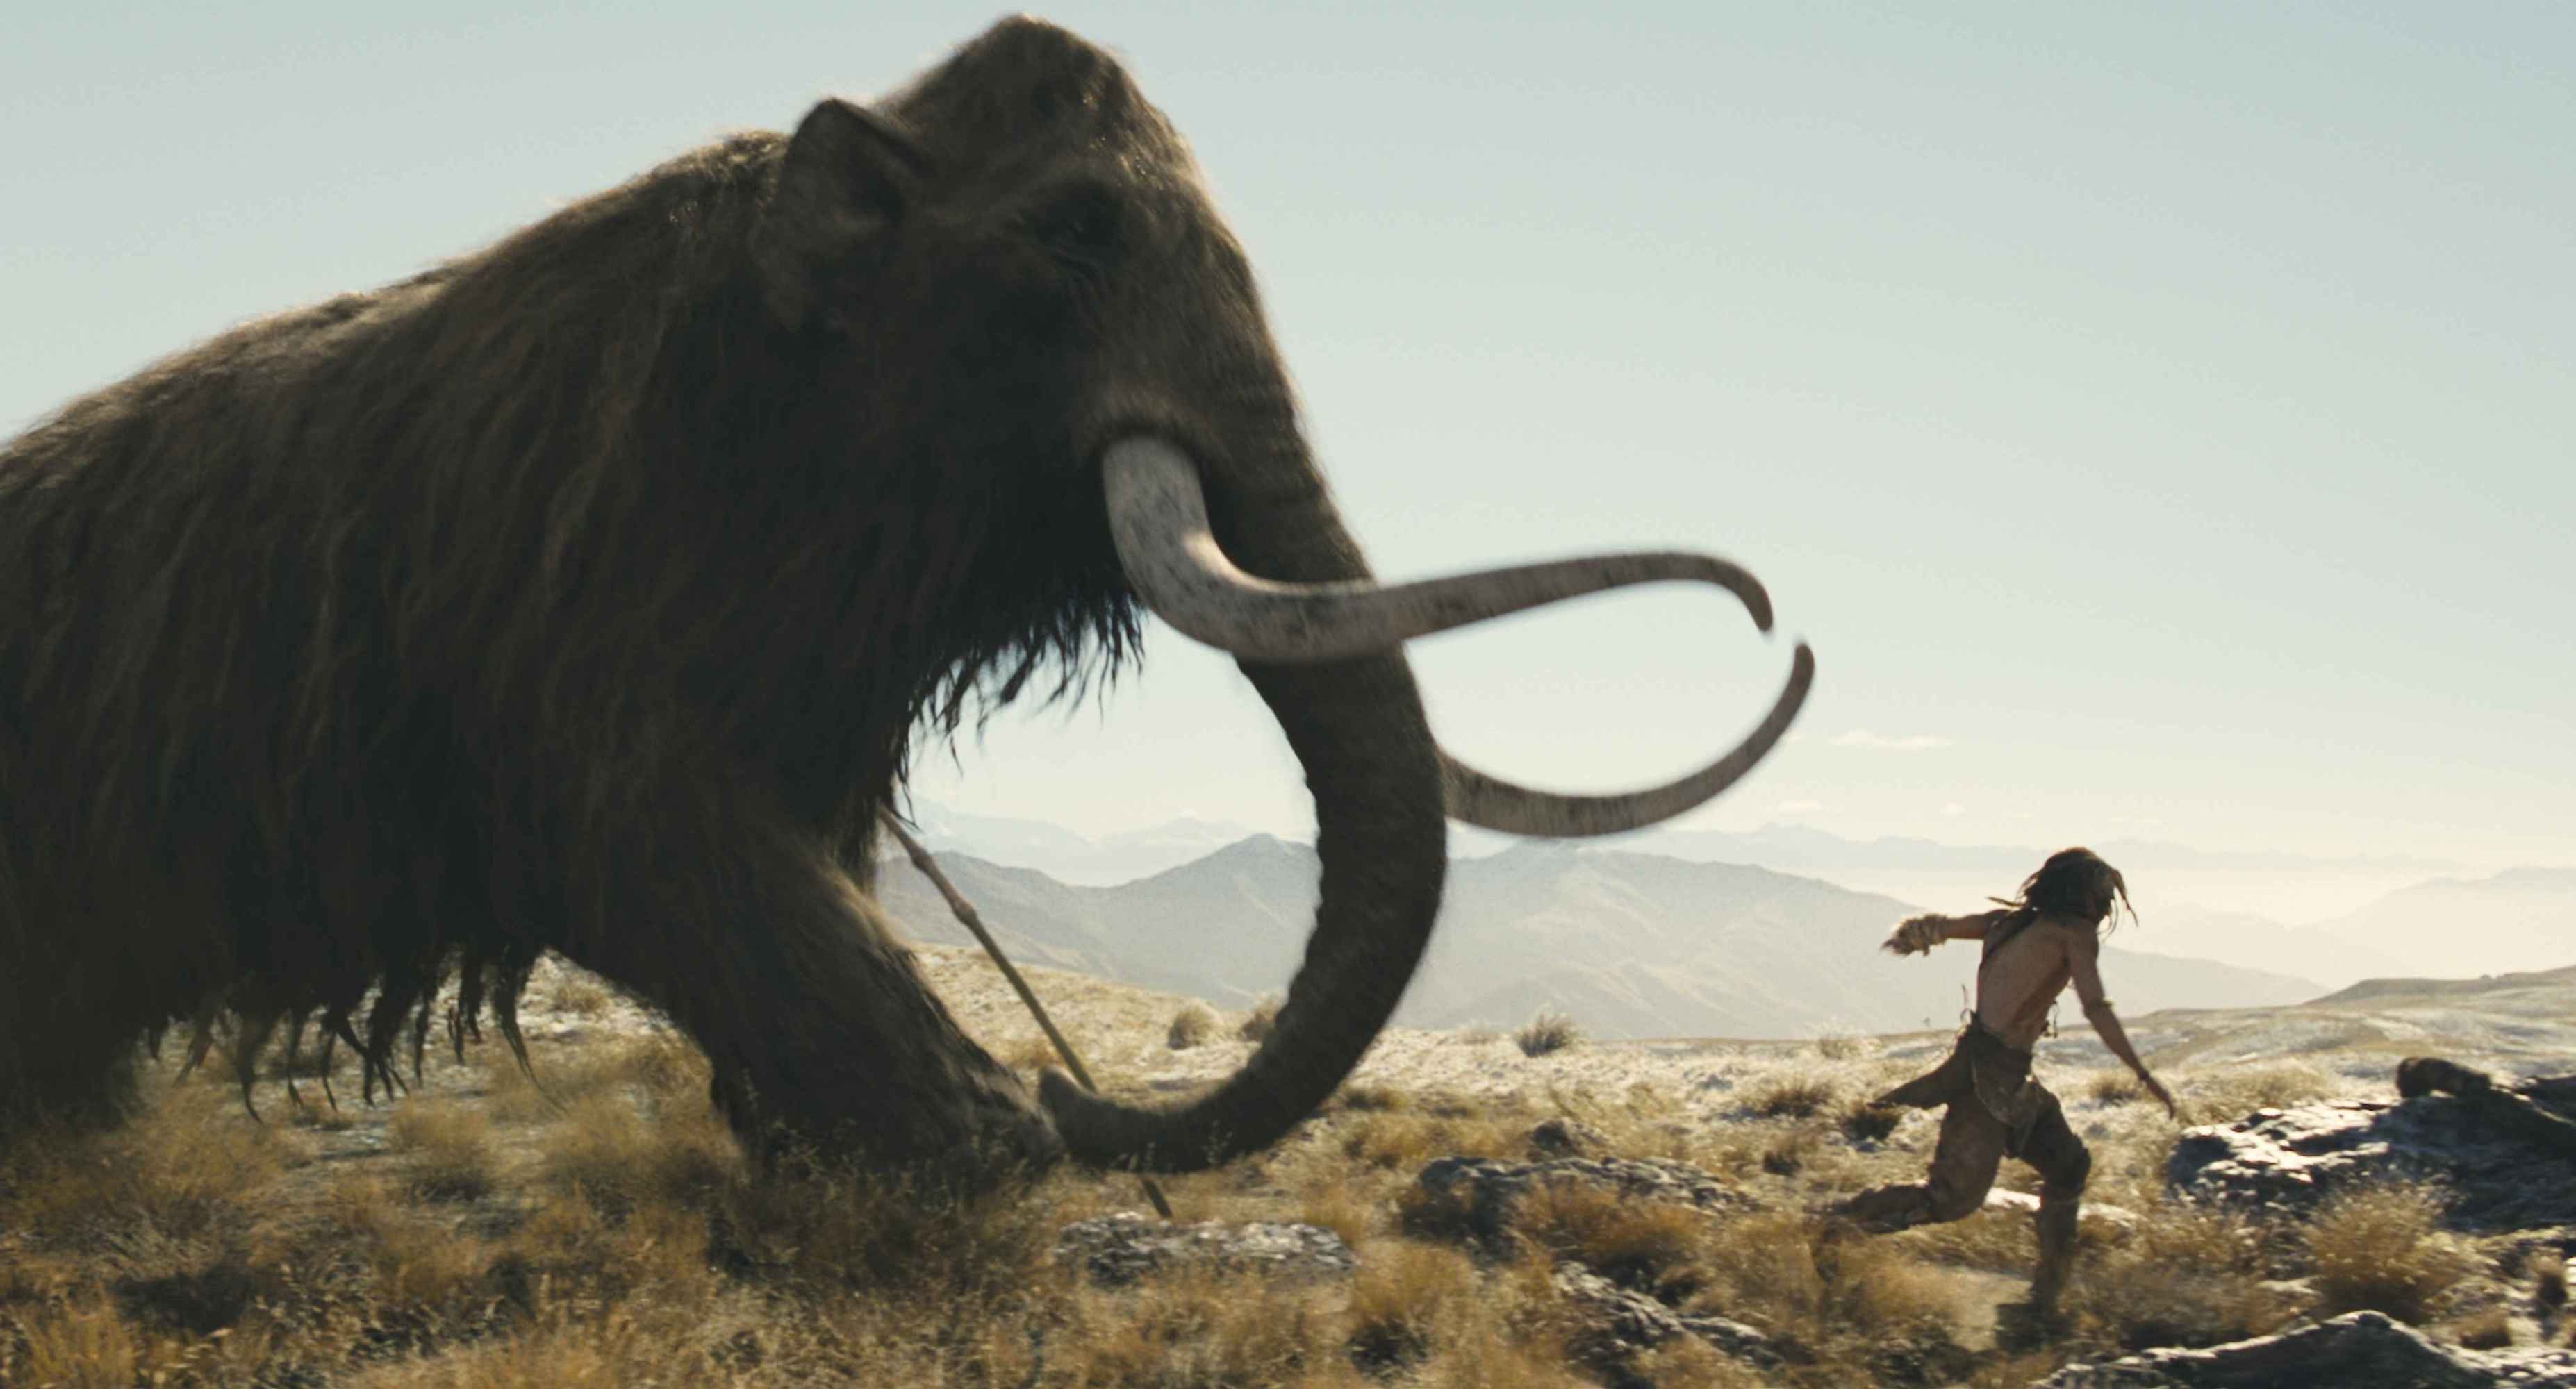 000 Bc The Escape Of A Large Elephant, - Woolly Mammoth 10000 Bc , HD Wallpaper & Backgrounds